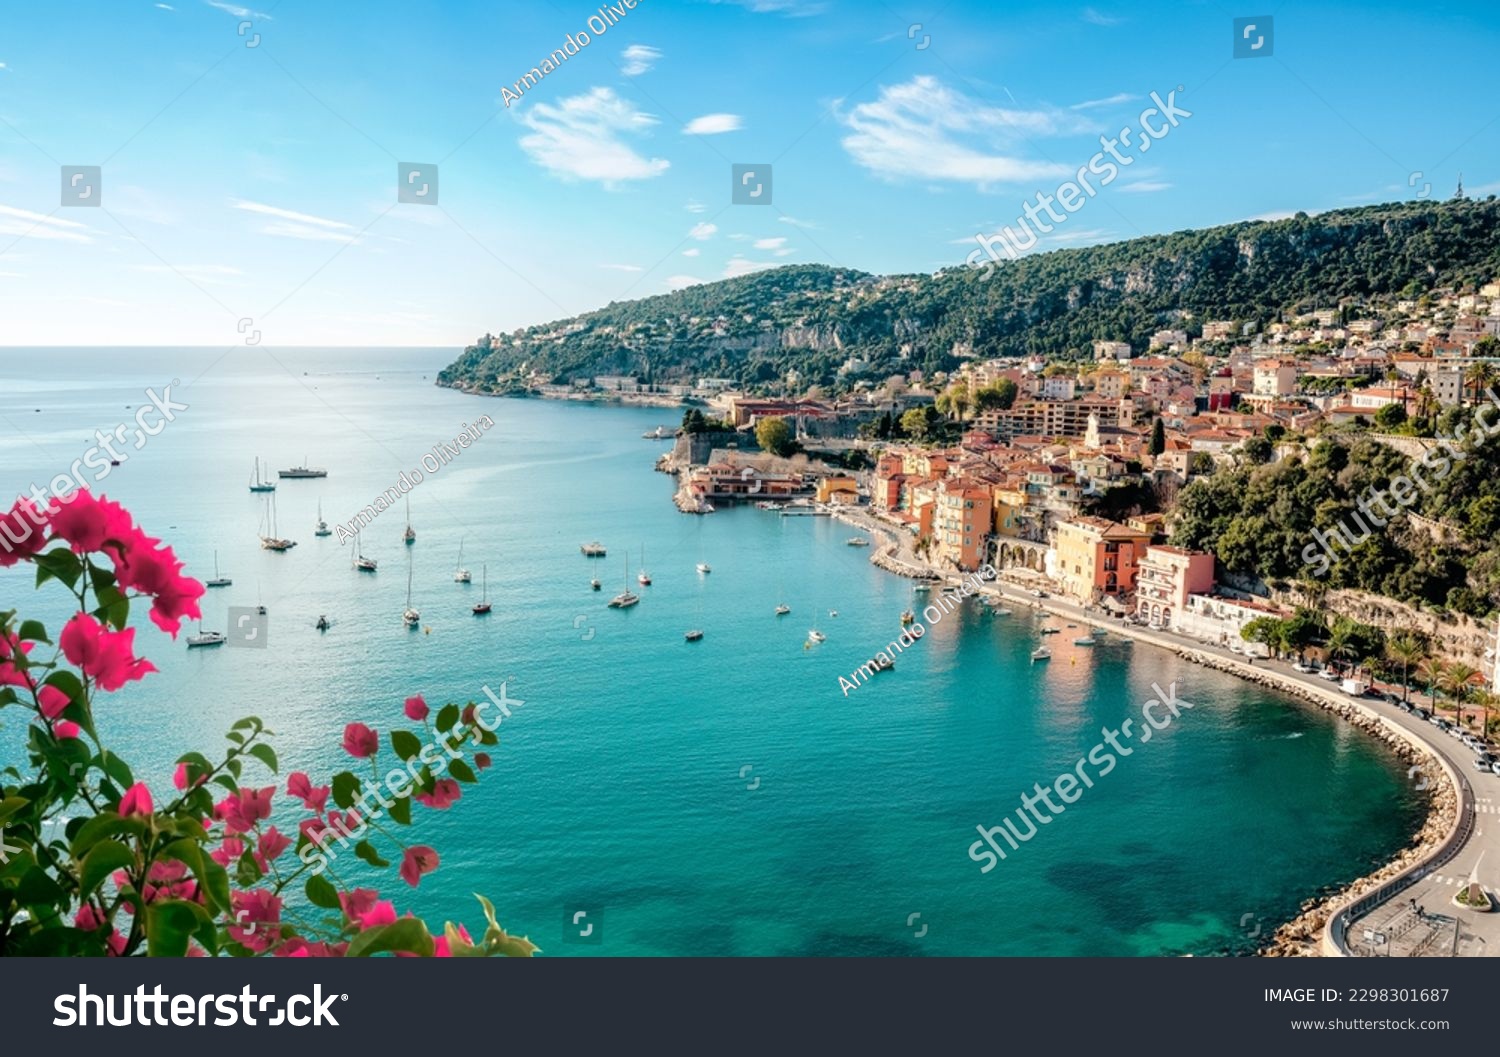 Villefranche sur Mer between Nice and Monaco on the French Riviera, Cote d Azur, France #2298301687